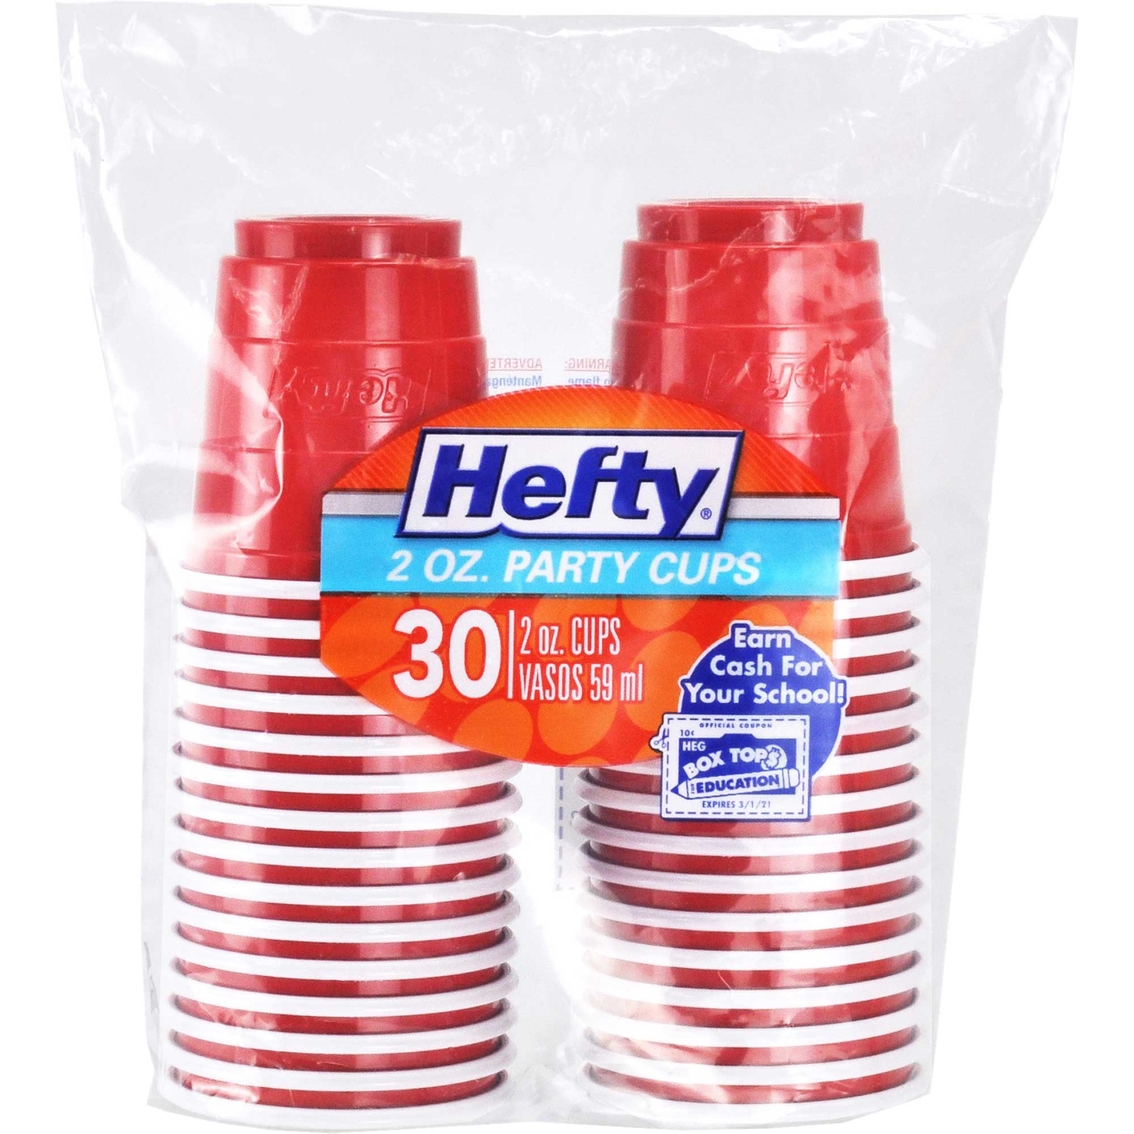 Hefty Party Cups 2 Oz.  Disposable Tableware & Napkins